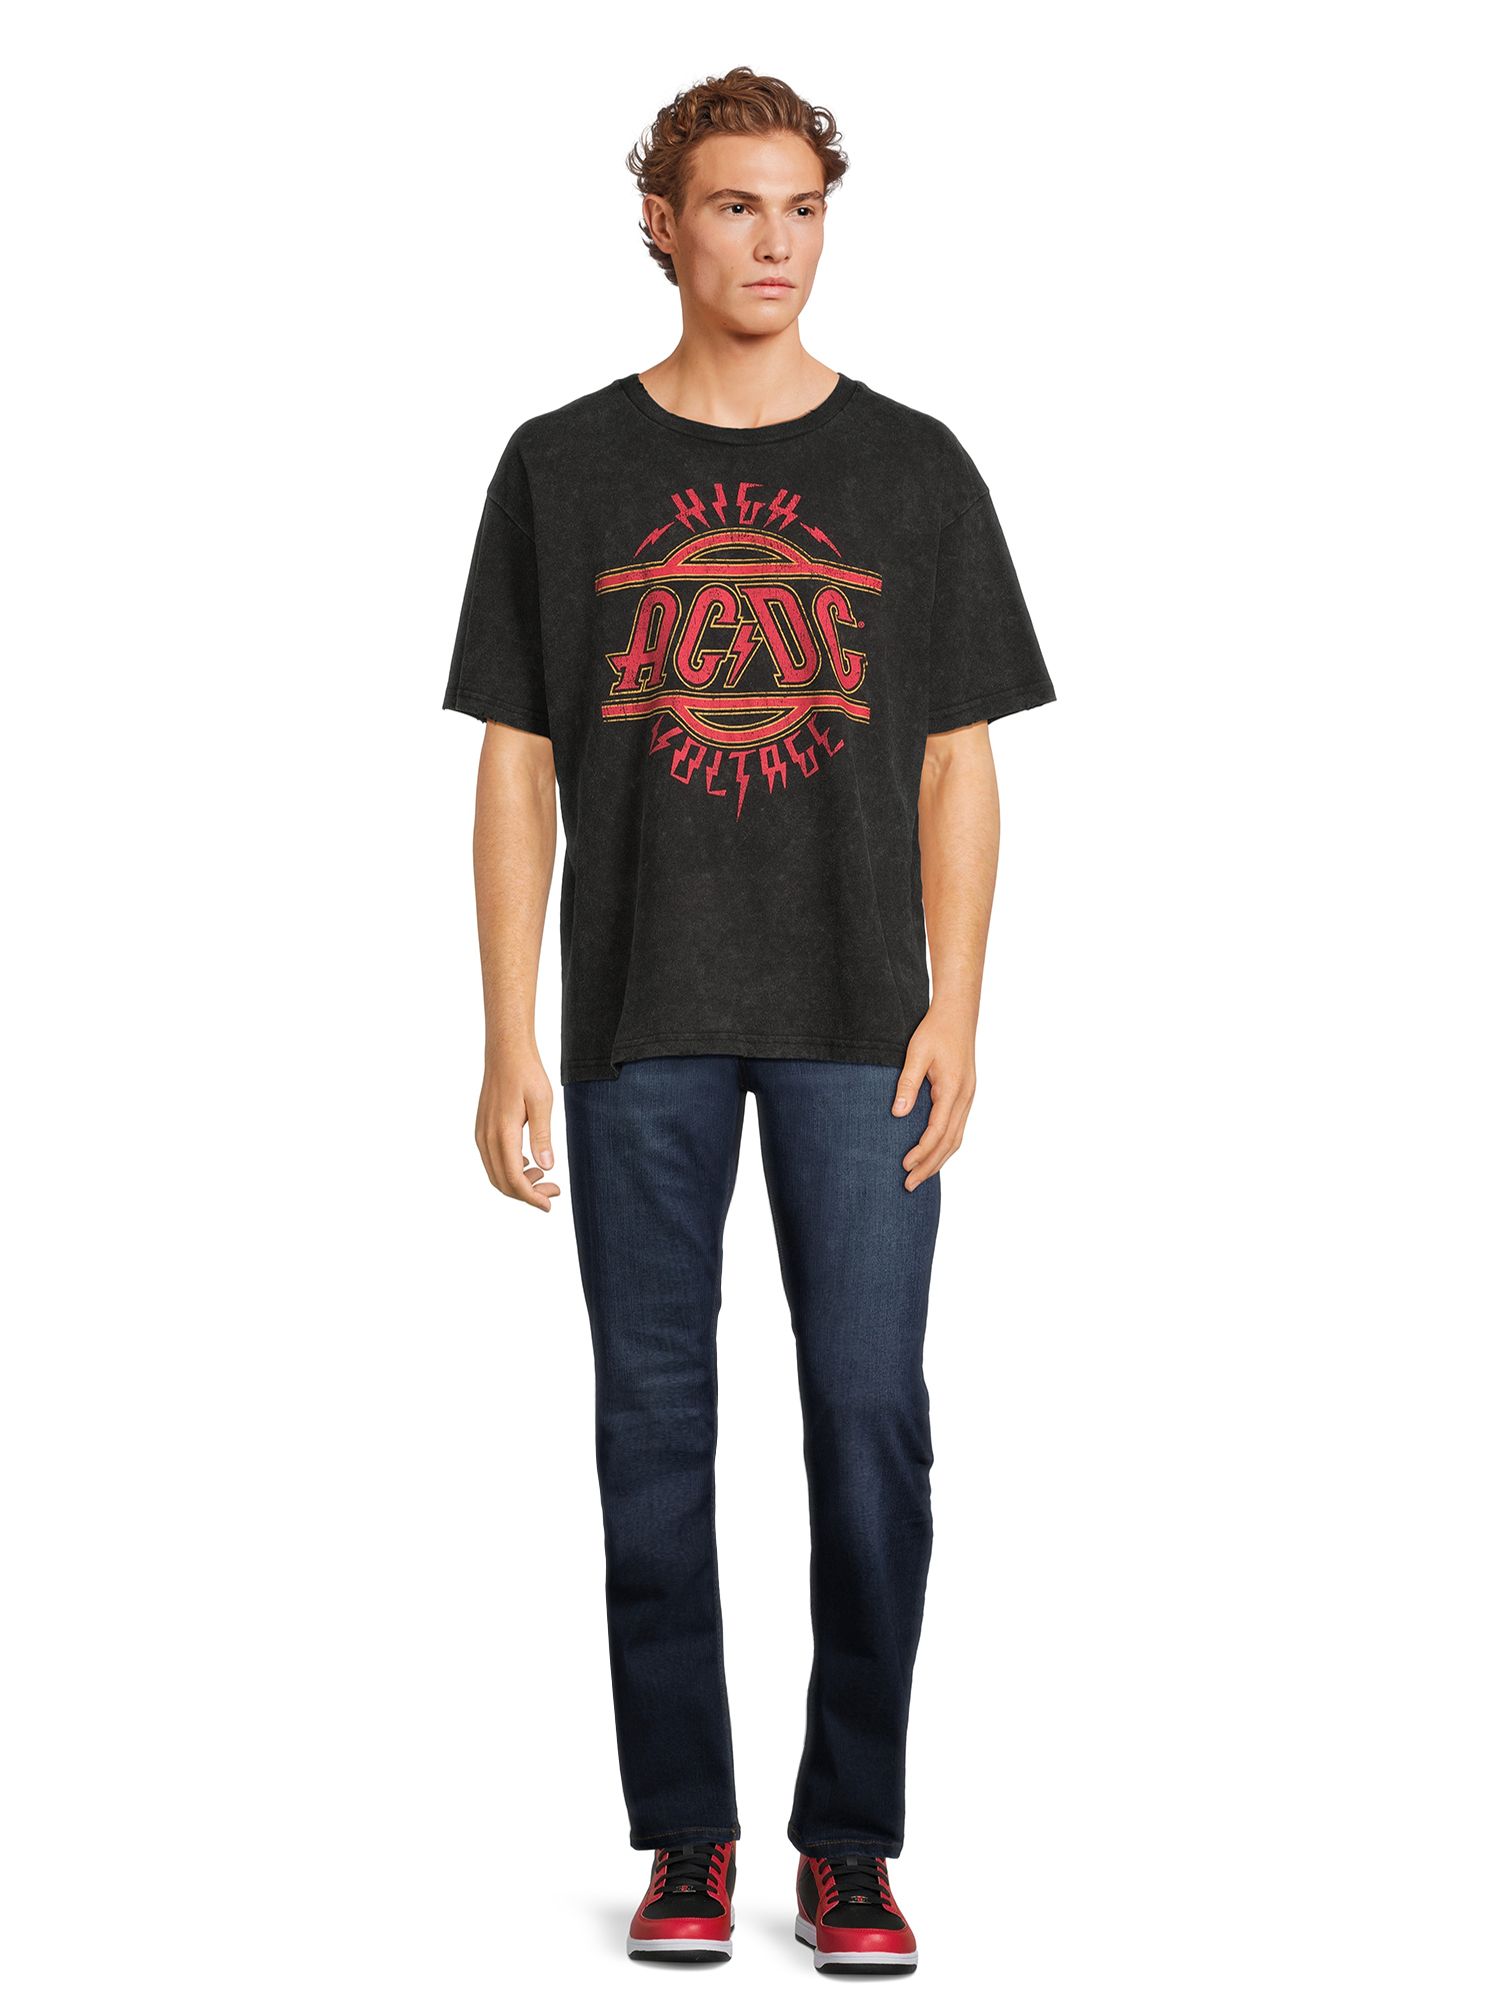 ACDC Men’s and Big Men’s Oversized Graphic Band Tee, Sizes XS-3XL - image 2 of 5